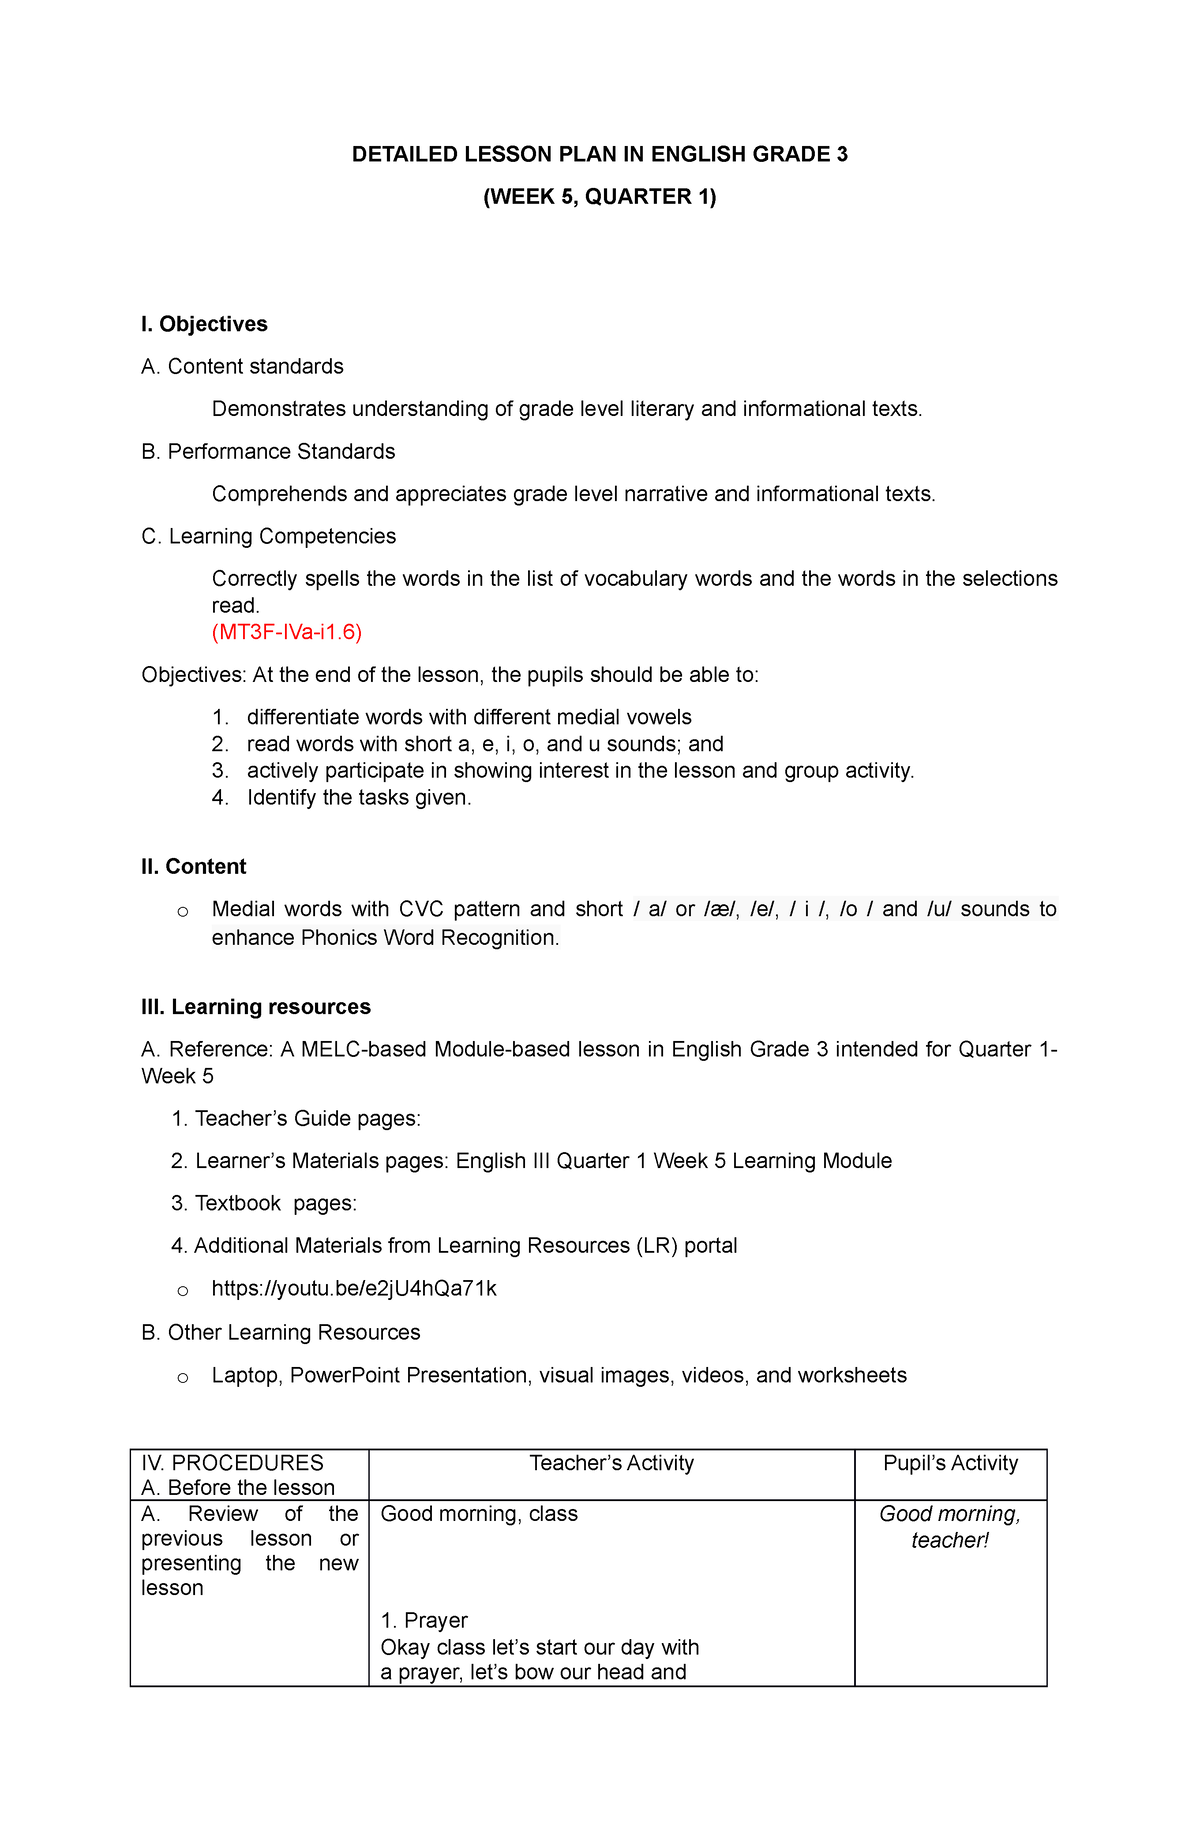 A Detailed Lesson Plan In English 3 1st Quarter Detailed Lesson Plan In English Grade 3 Week 3418